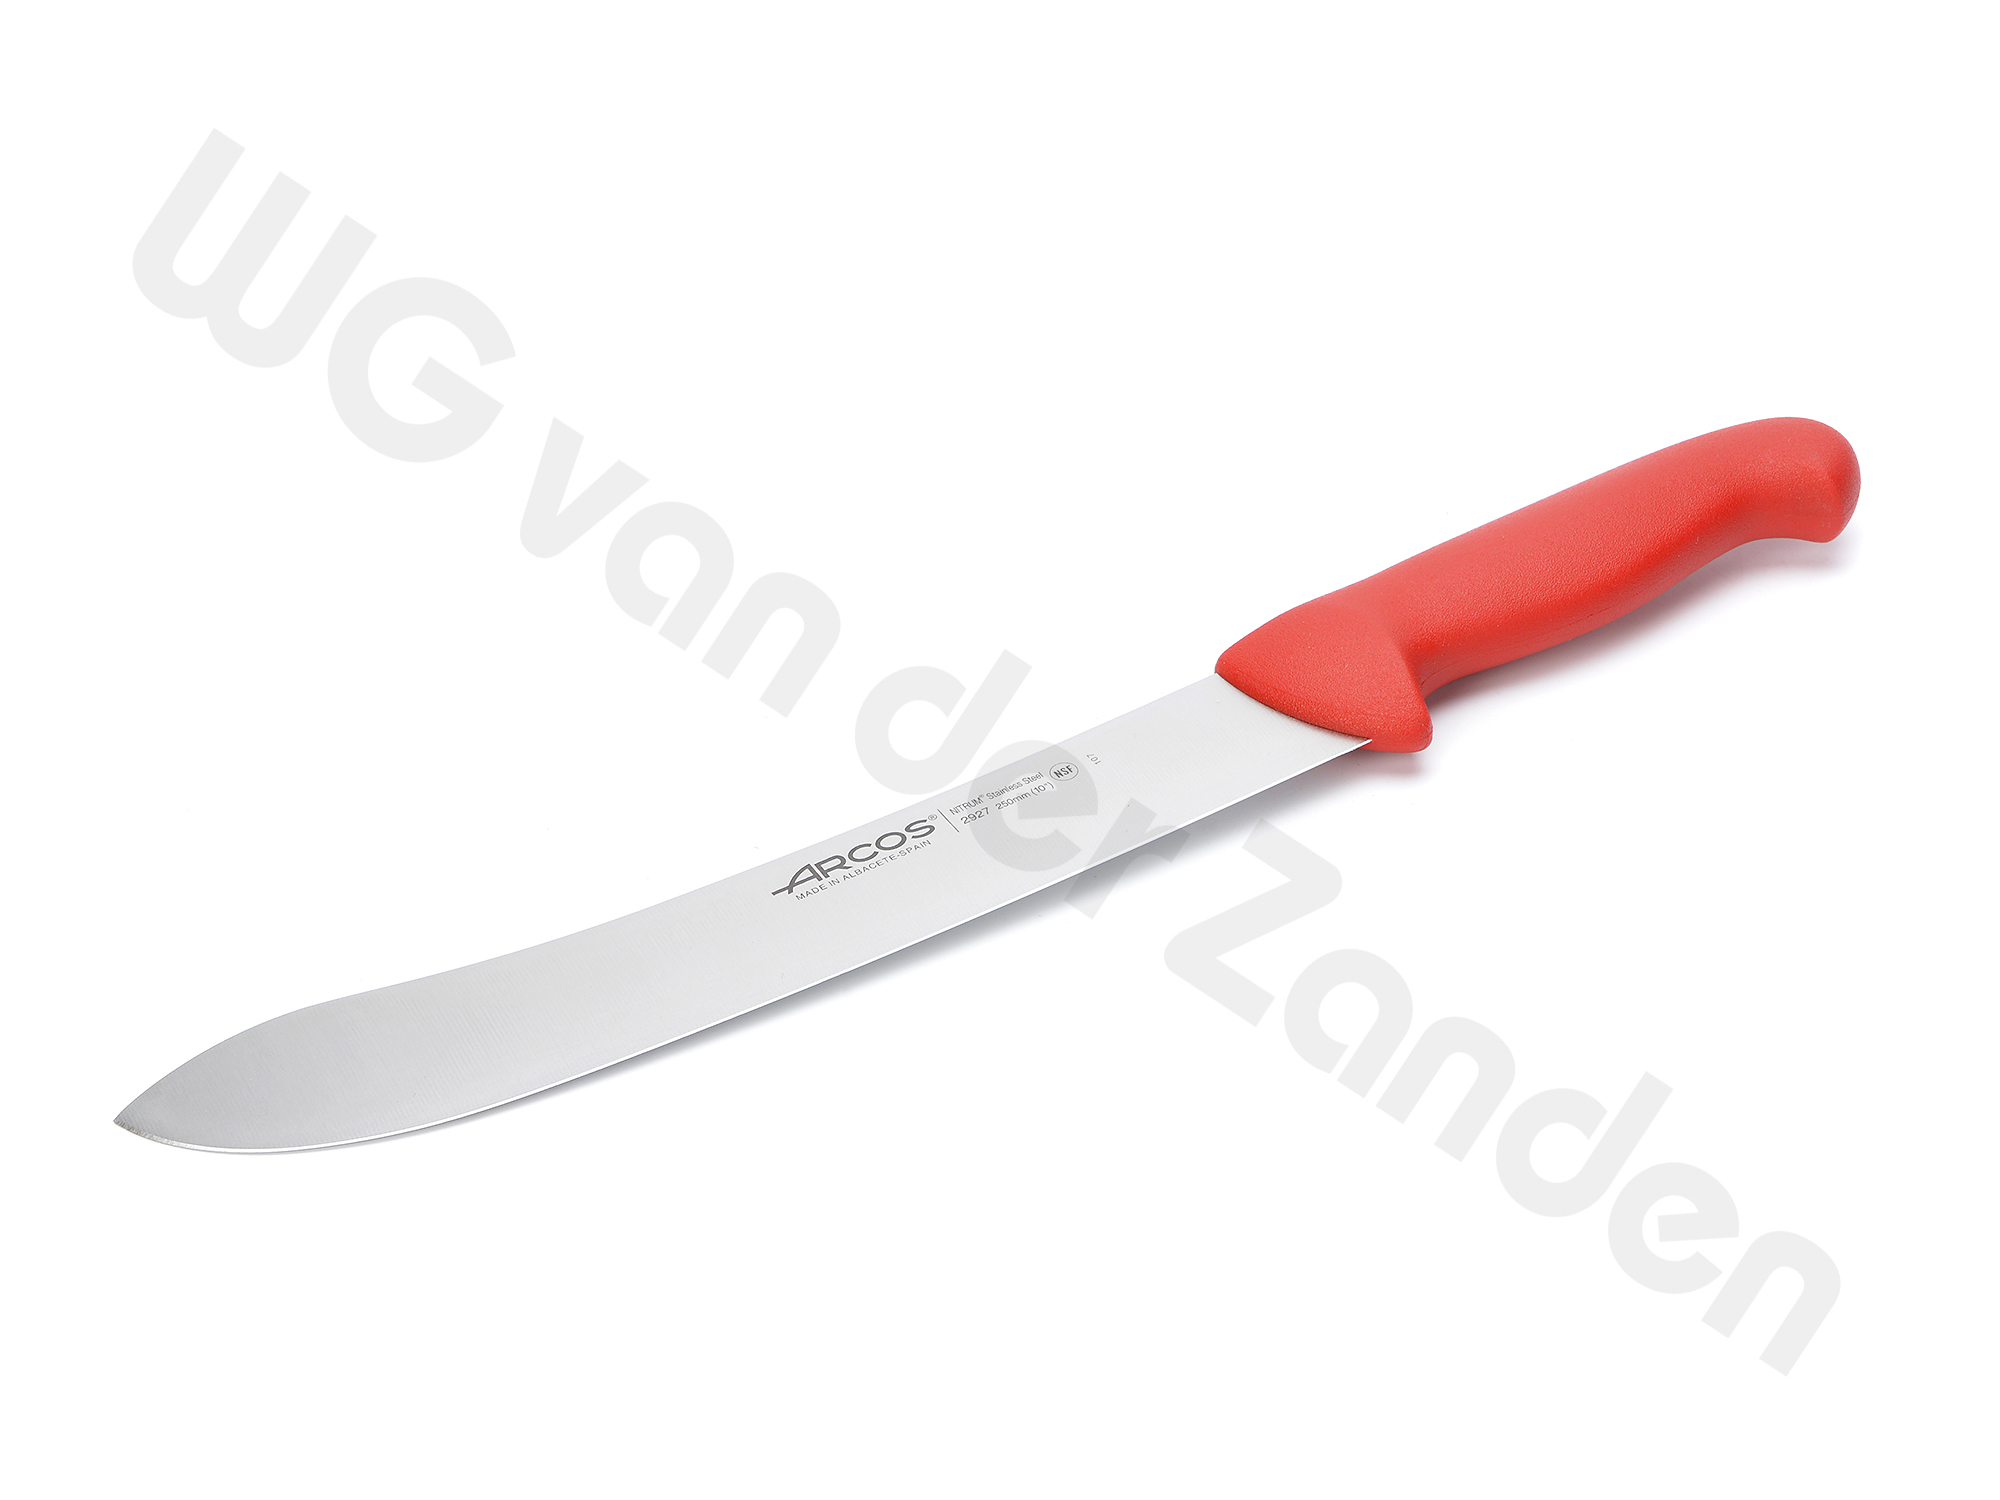 551558 BUTCHER KNIFE 25CM RED HANDLE ARCOS